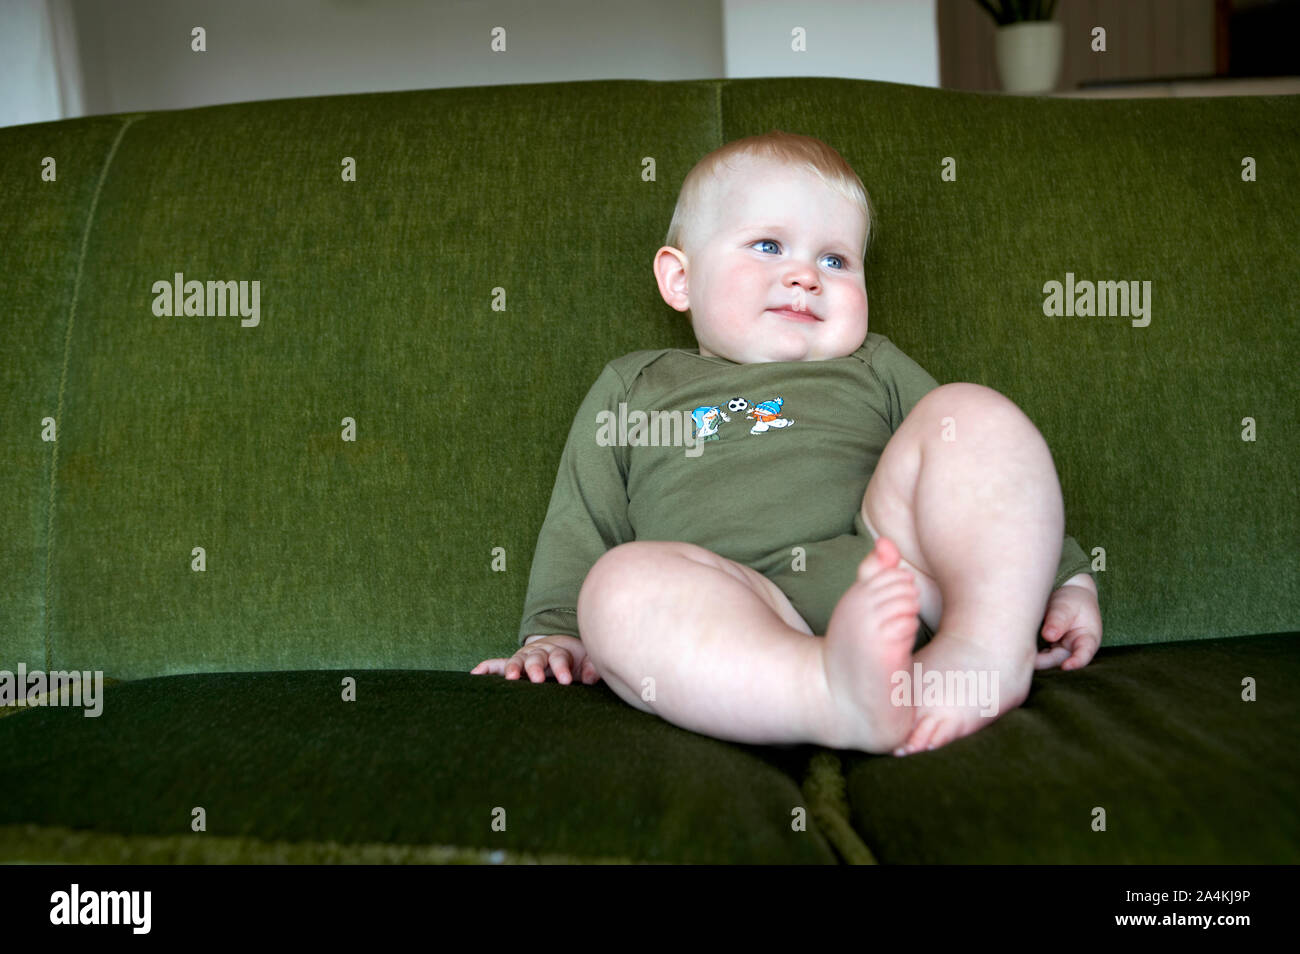 Baby on green couch Stock Photo